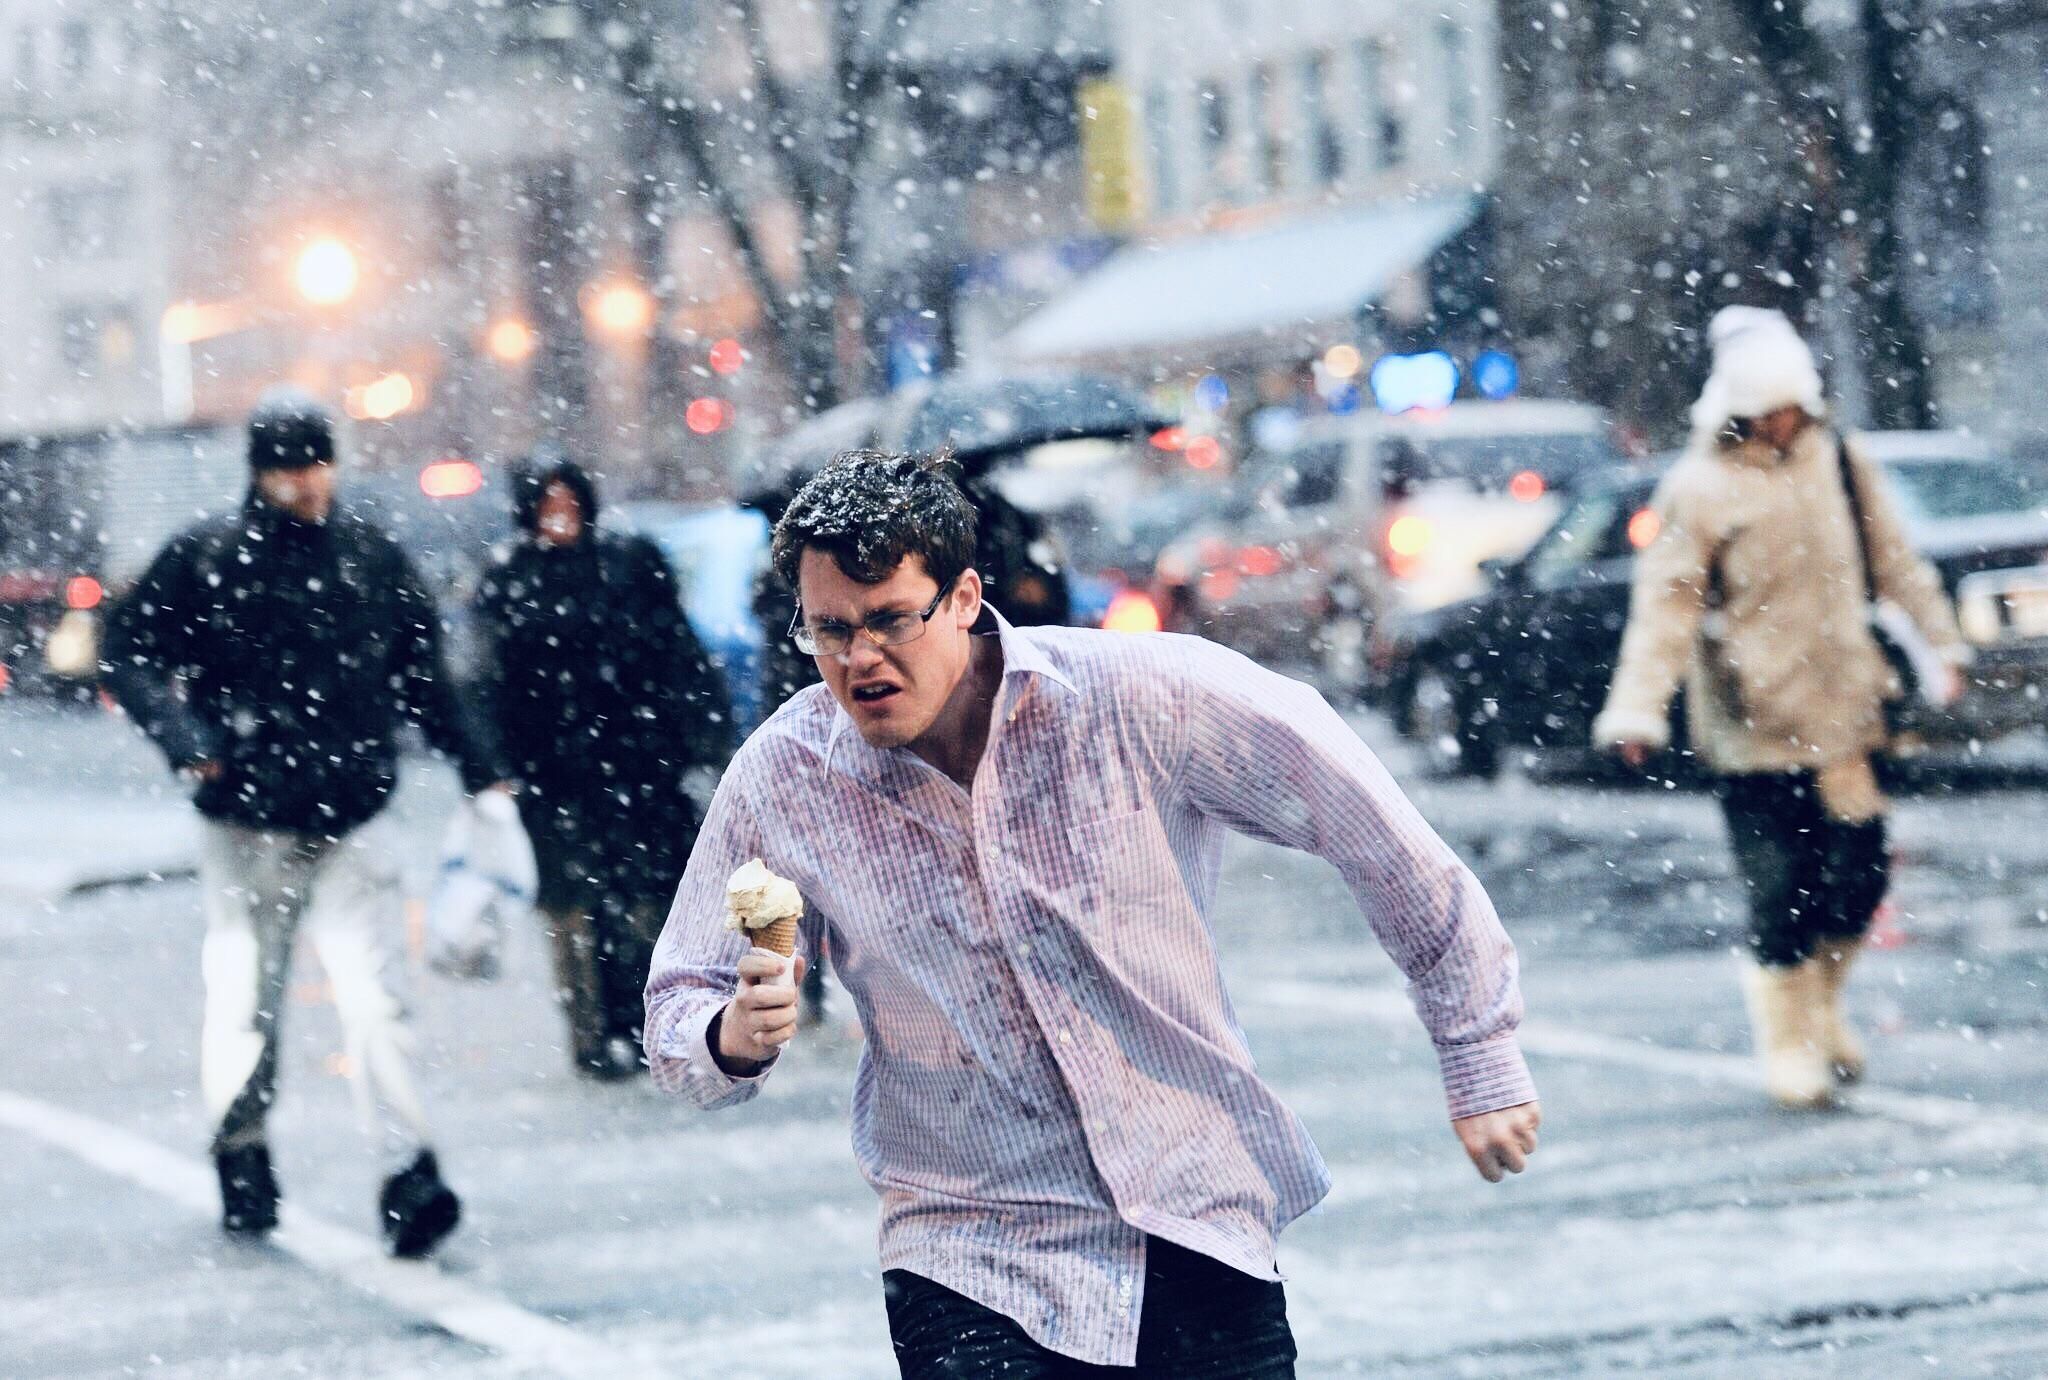 Man saves ice cream from blizzard.